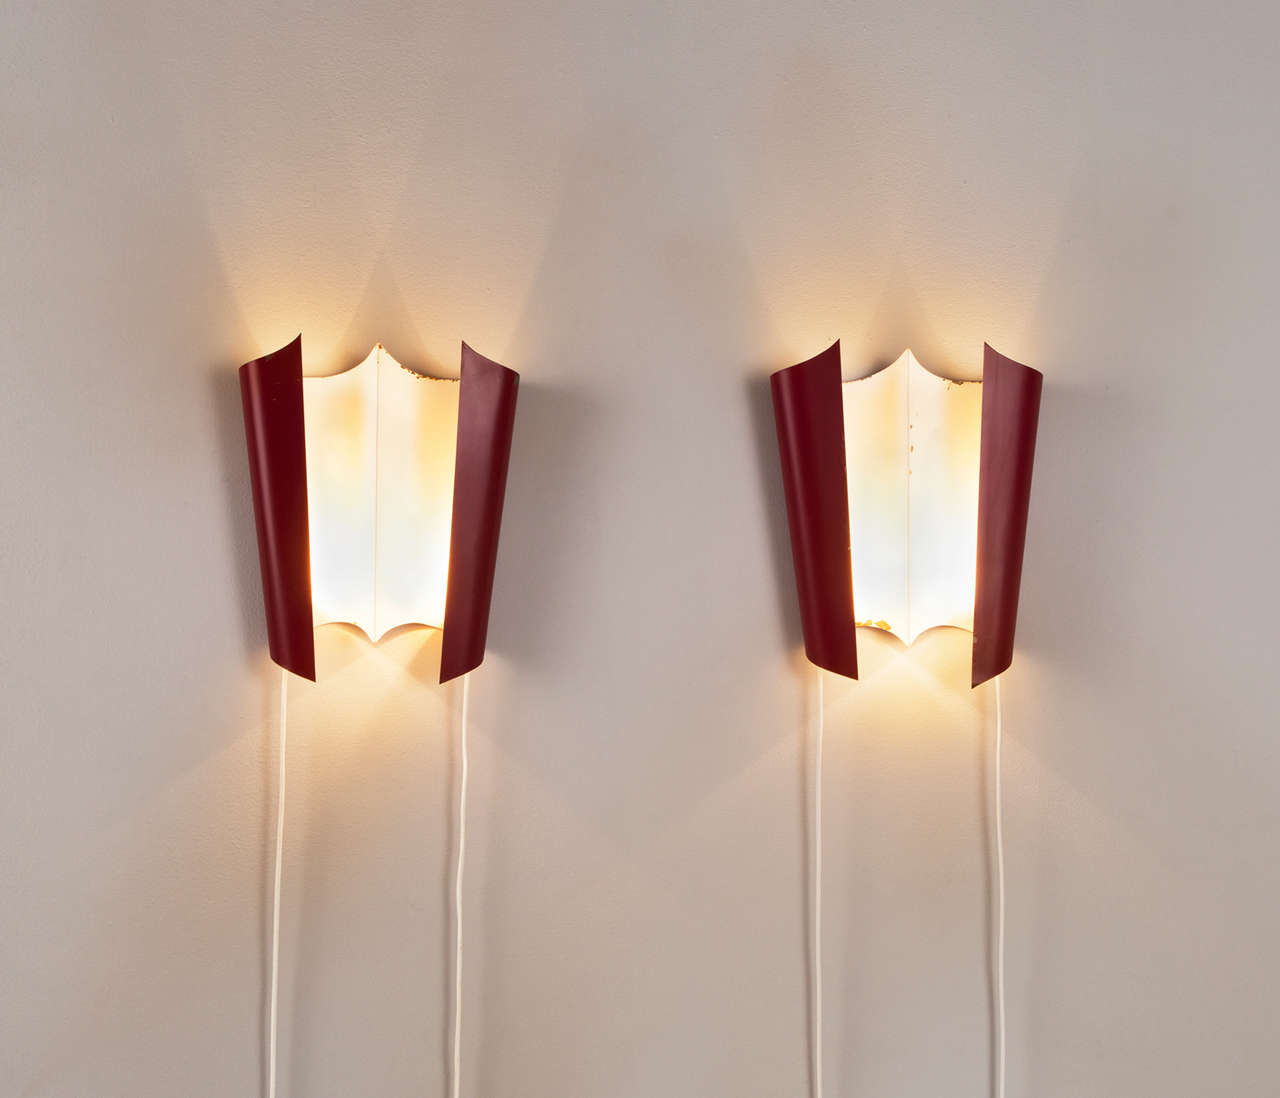 Set of two wall lights, in metal, for Stilnovo, Italy, 1950s.

Excellent pair of wall lights with very nice and elegant shape and light spreading.
Produced by Stilnovo. The red coated frame is in nice contrast with the white inside. Both show